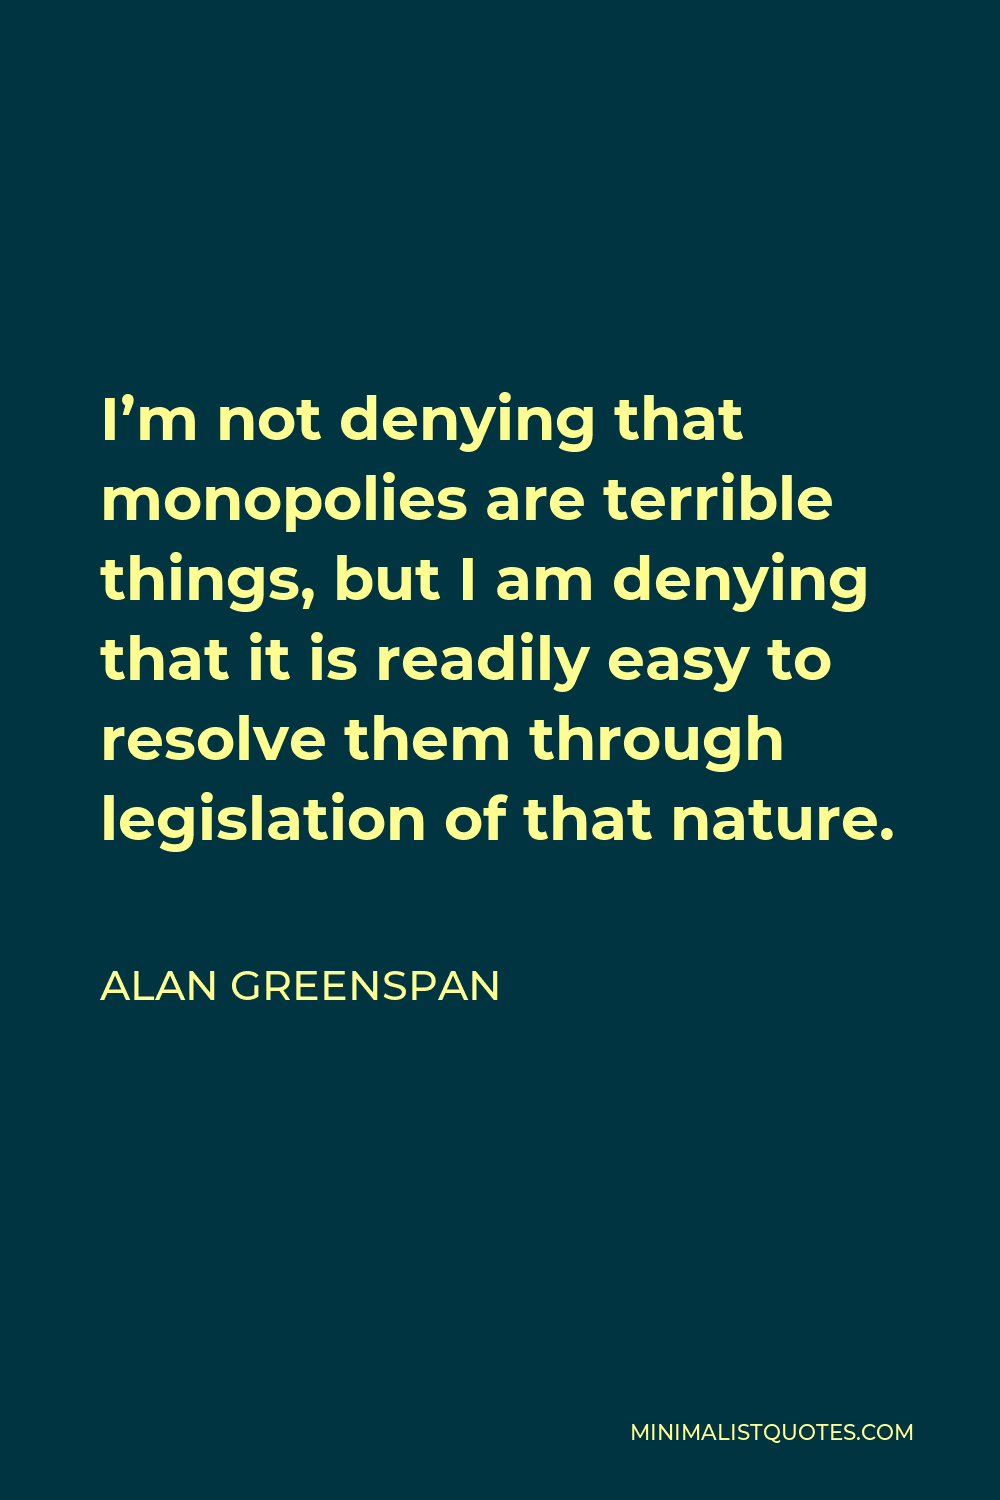 Alan Greenspan Quote - I’m not denying that monopolies are terrible things, but I am denying that it is readily easy to resolve them through legislation of that nature.